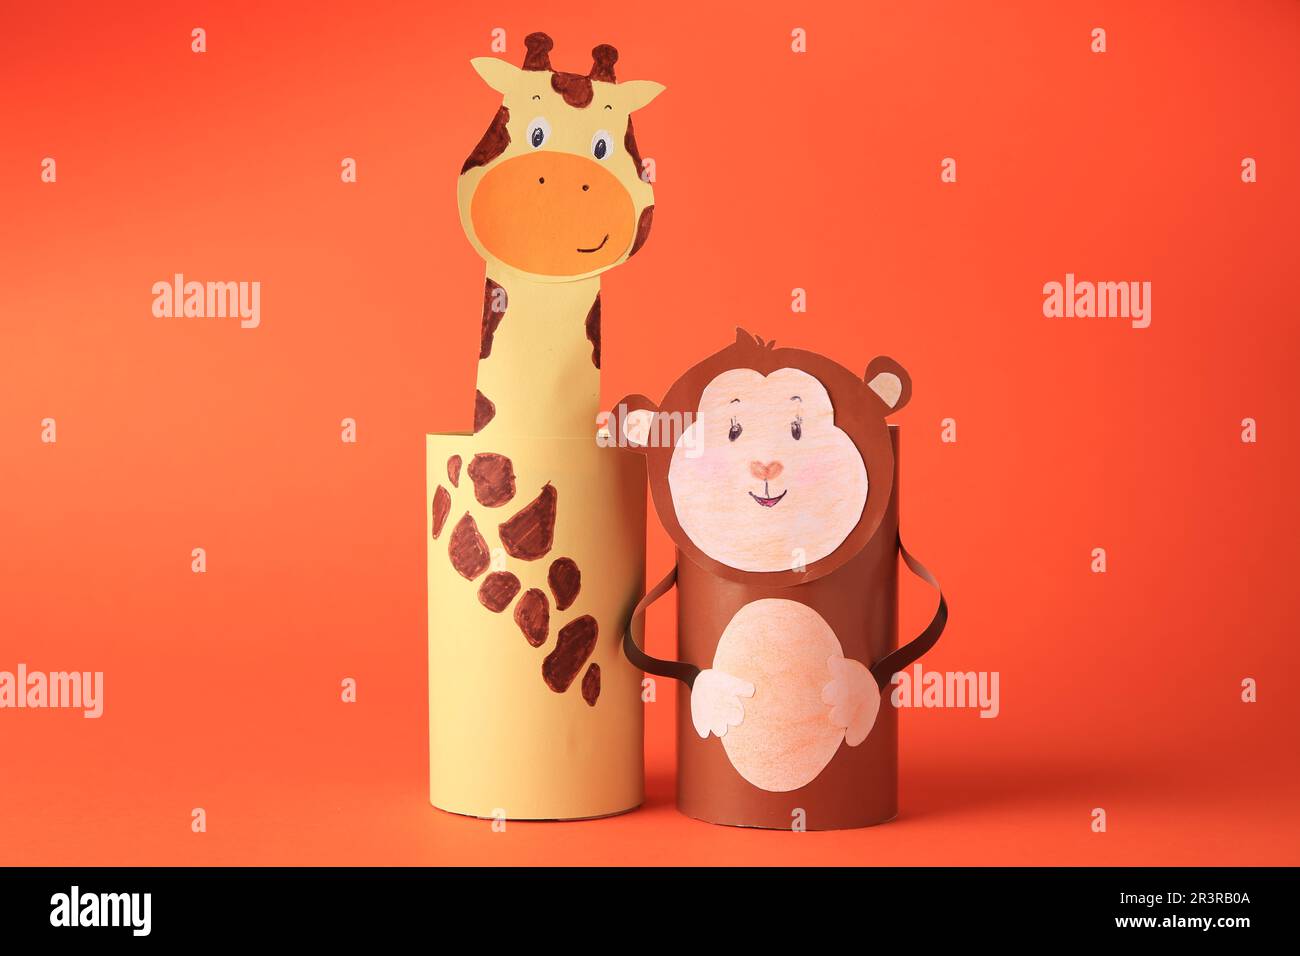 Toy monkey and giraffe made from toilet paper hubs on orange background. Children's handmade ideas Stock Photo